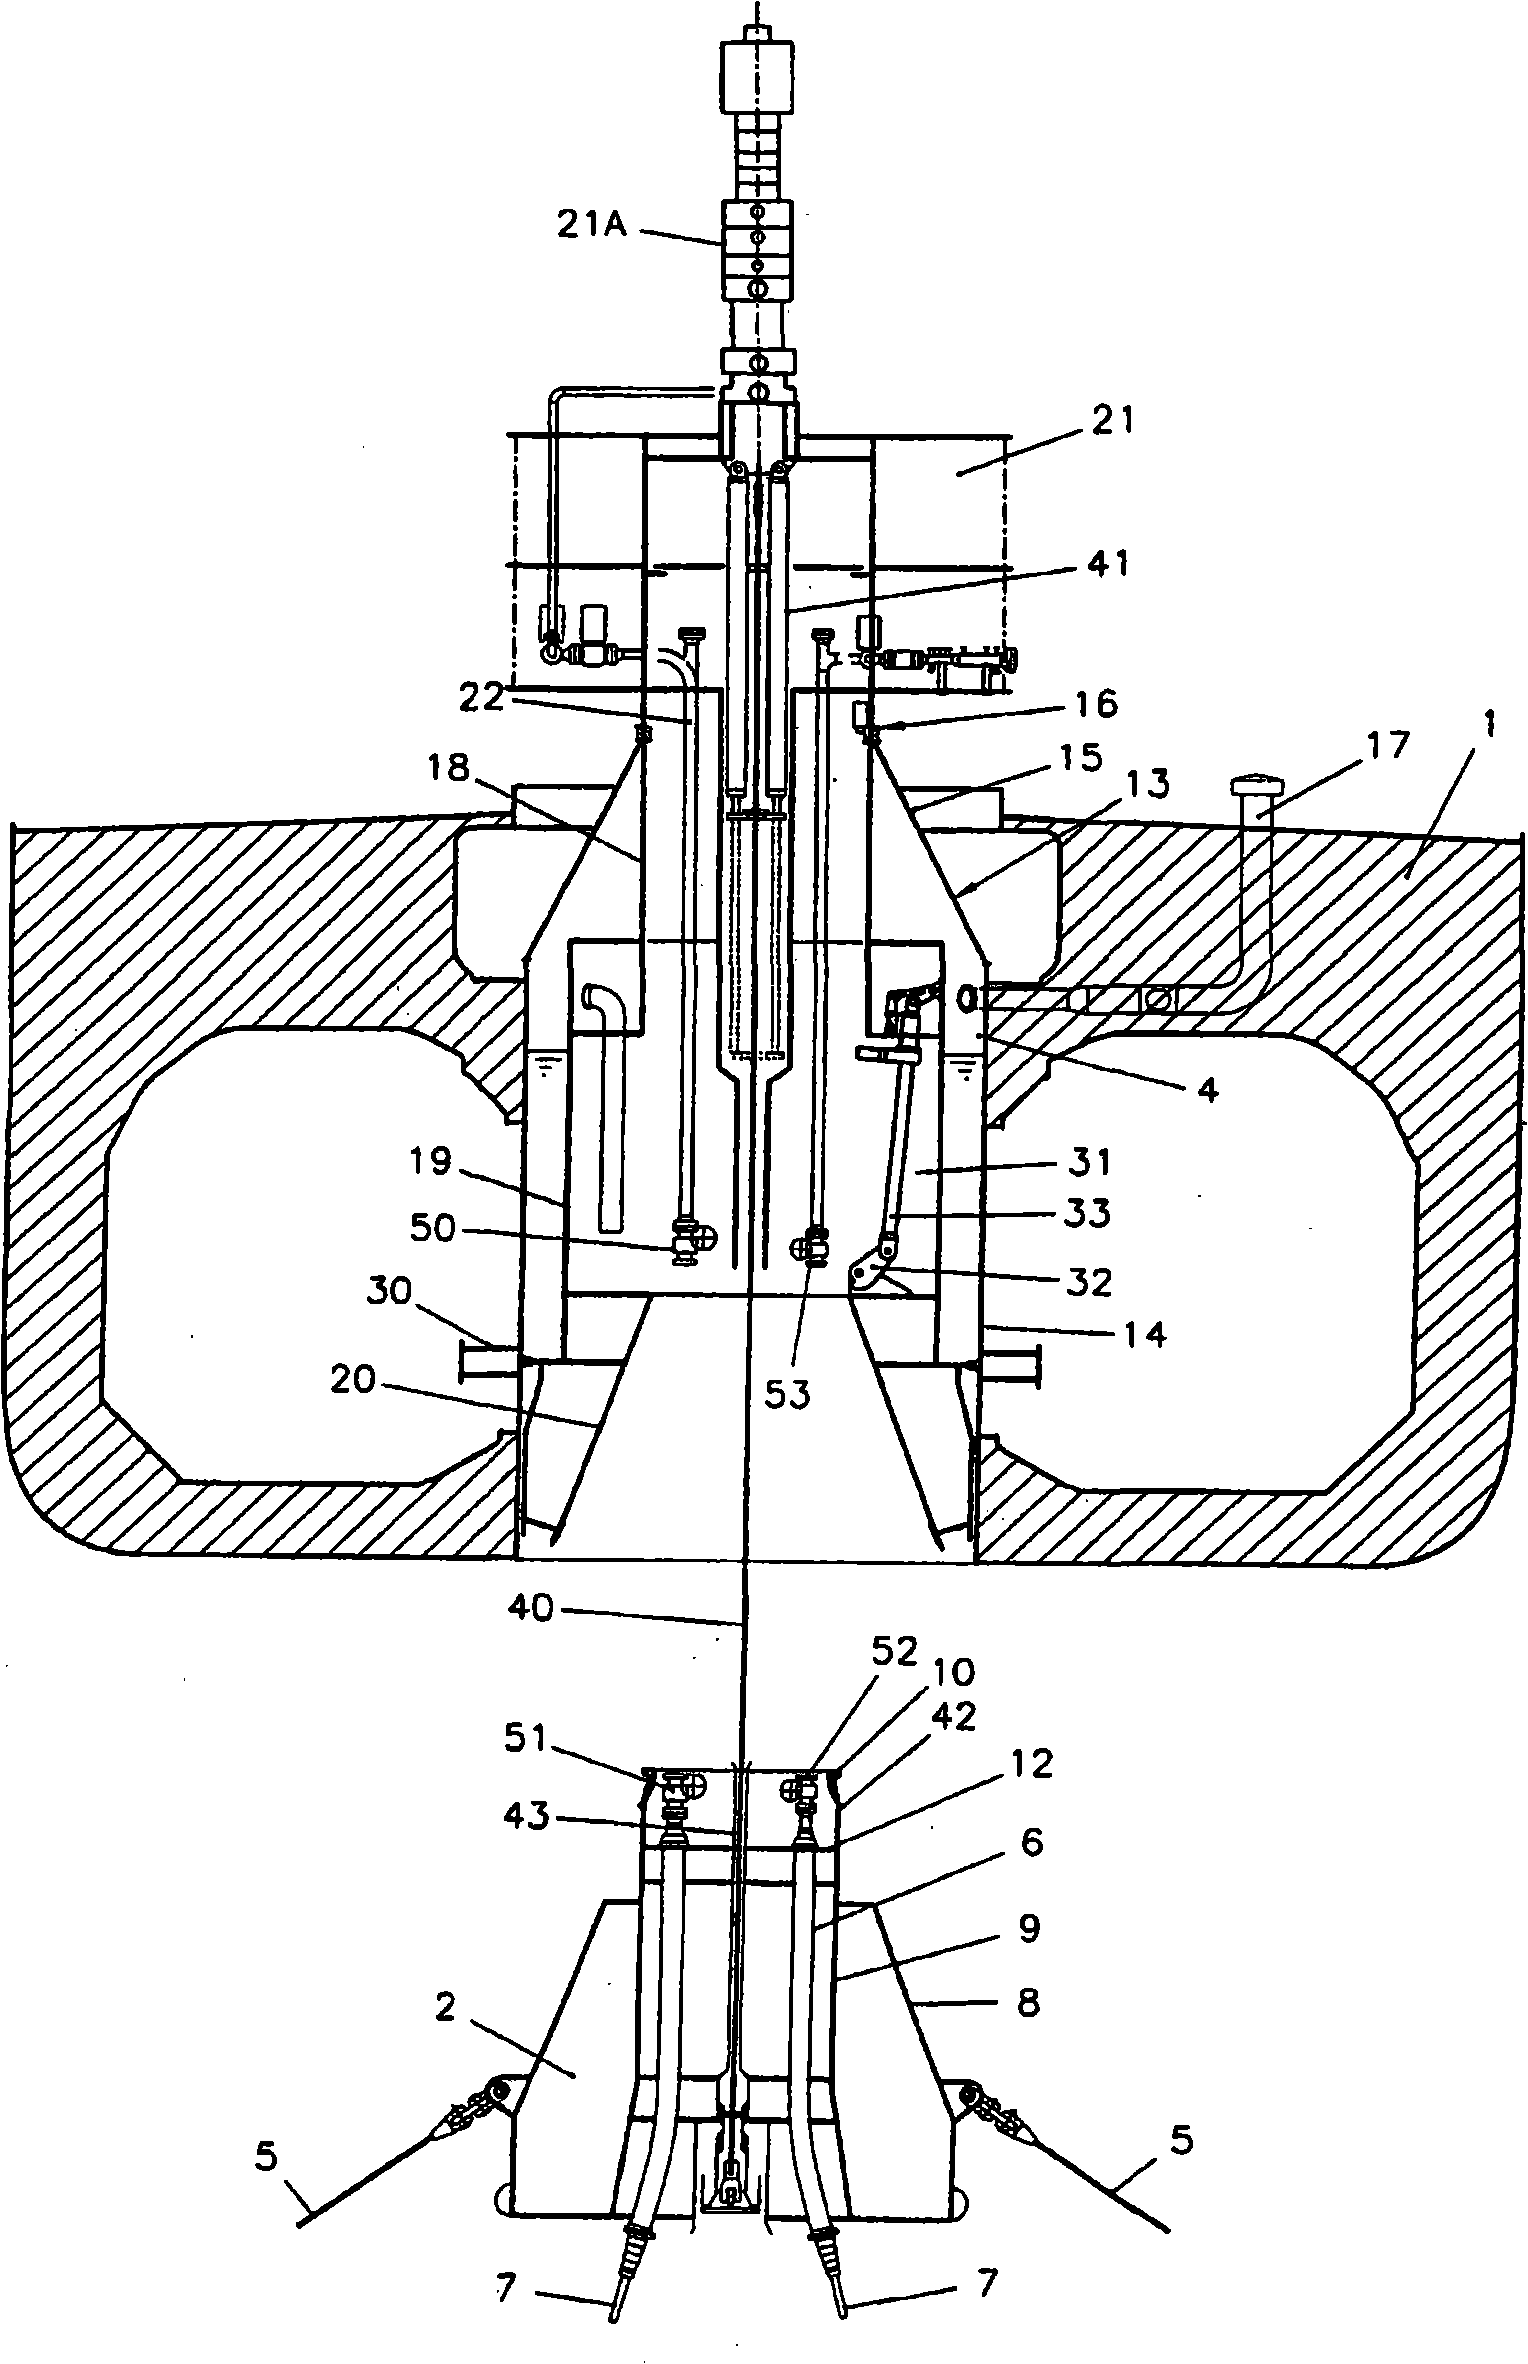 Disconnectable mooring system for a vessel